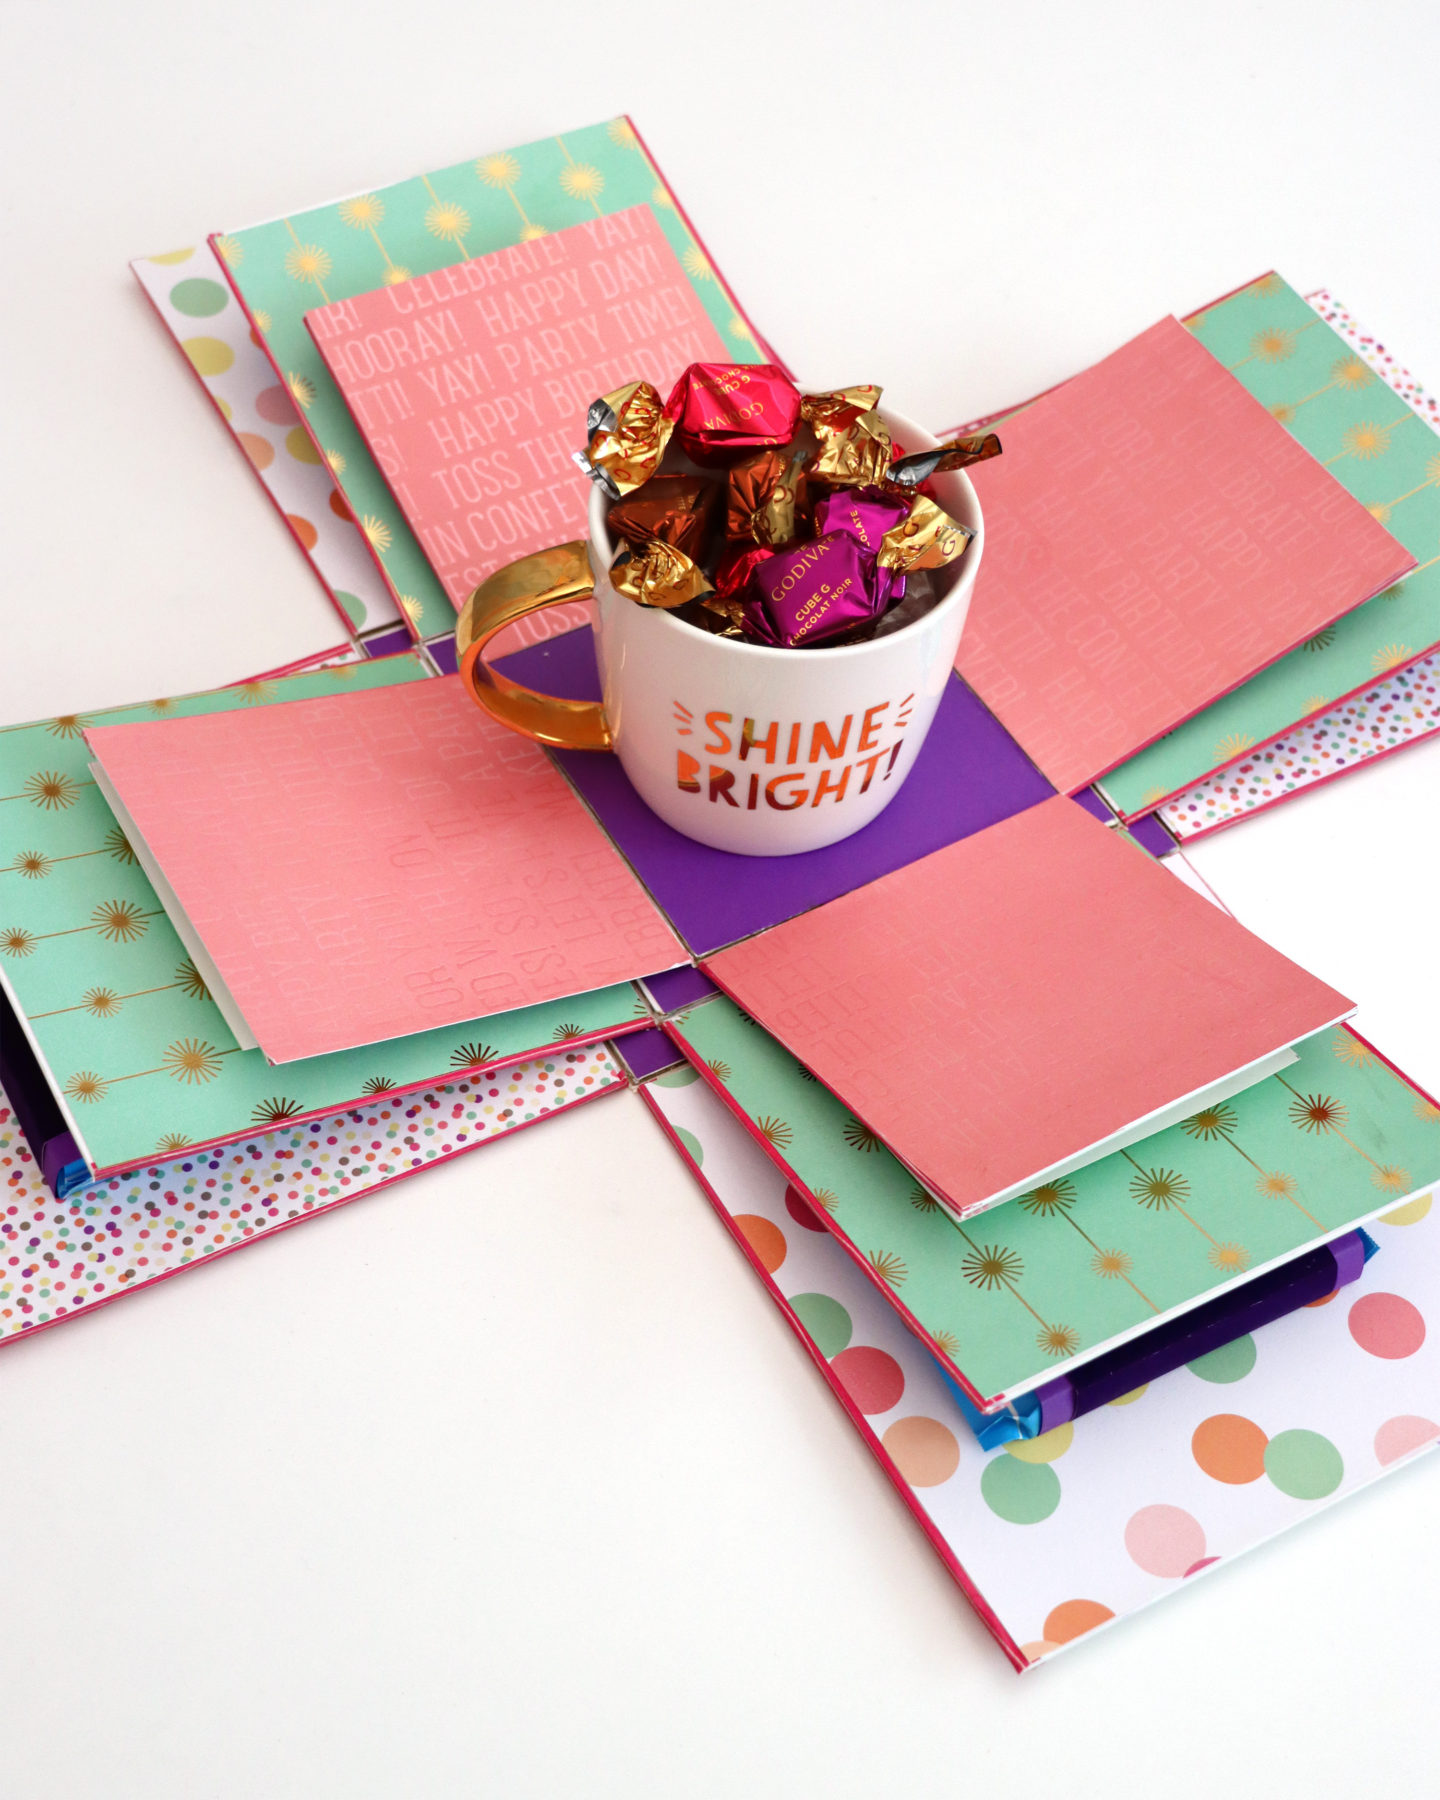 7 Profit-Boosting Tips for Gift Box Making - Maximize your profits now!